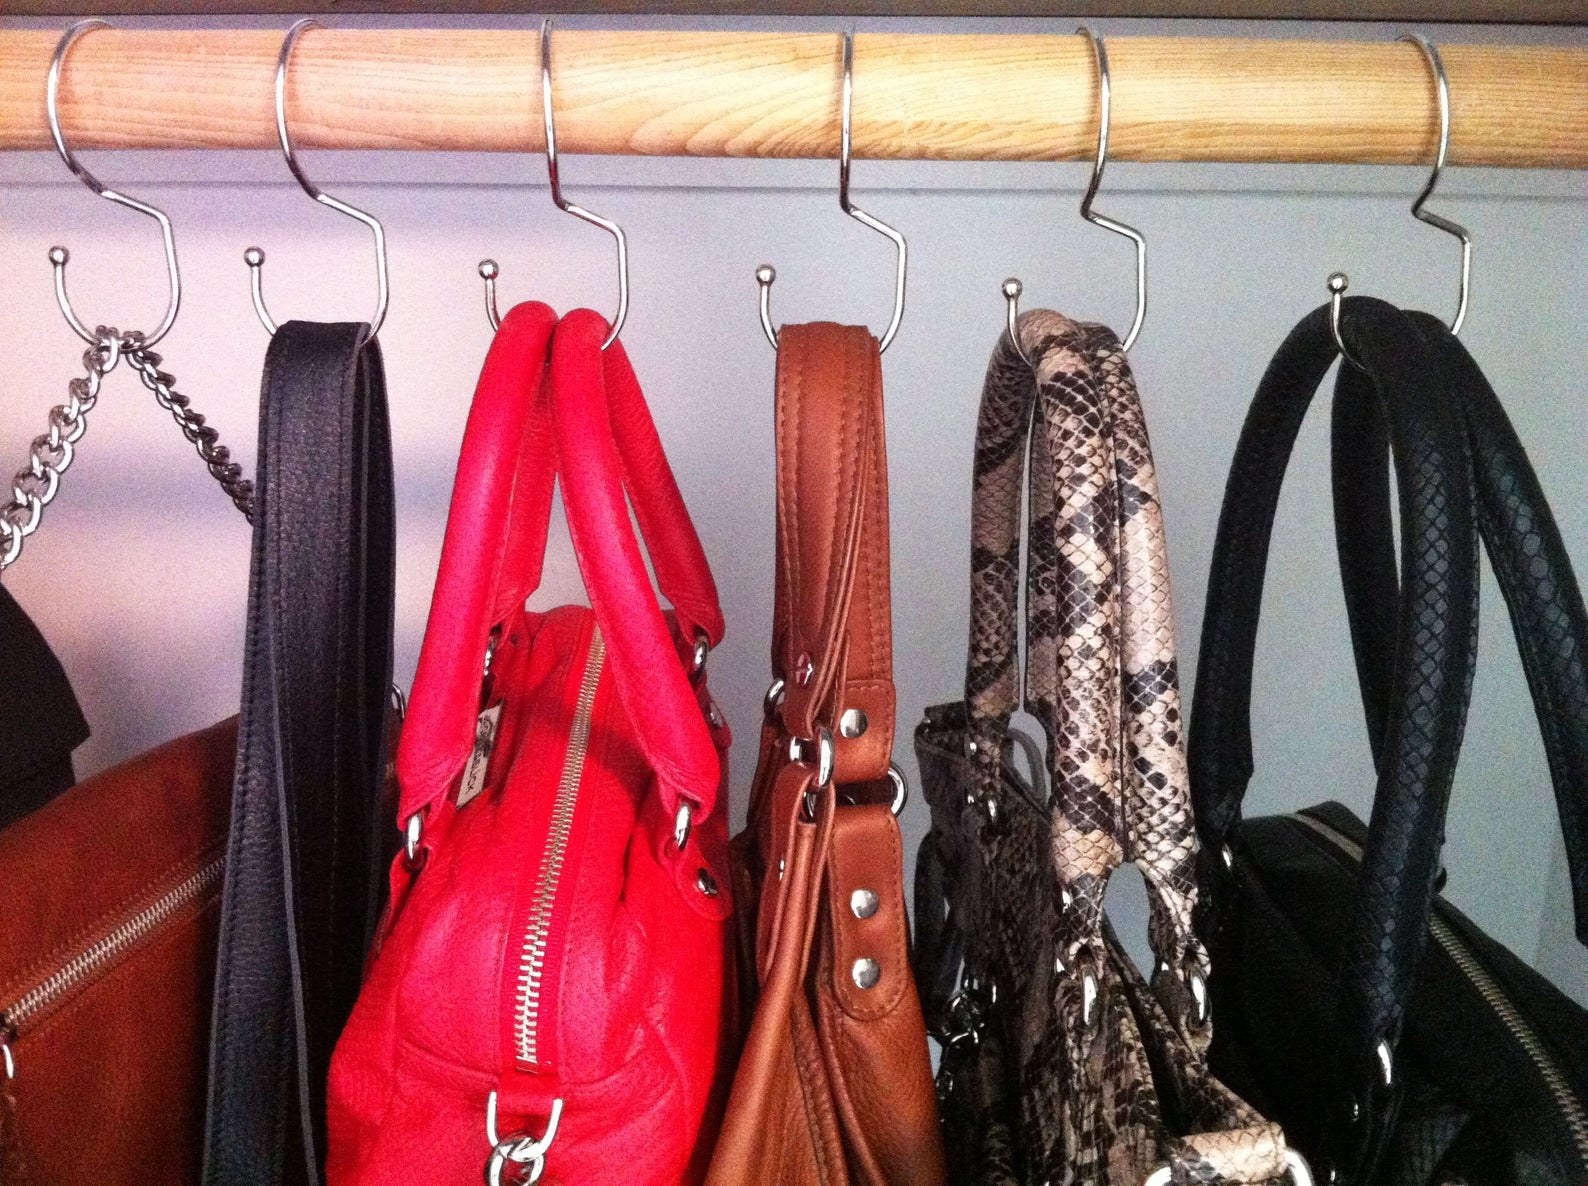 Six silver small hooks holding purses in a closet